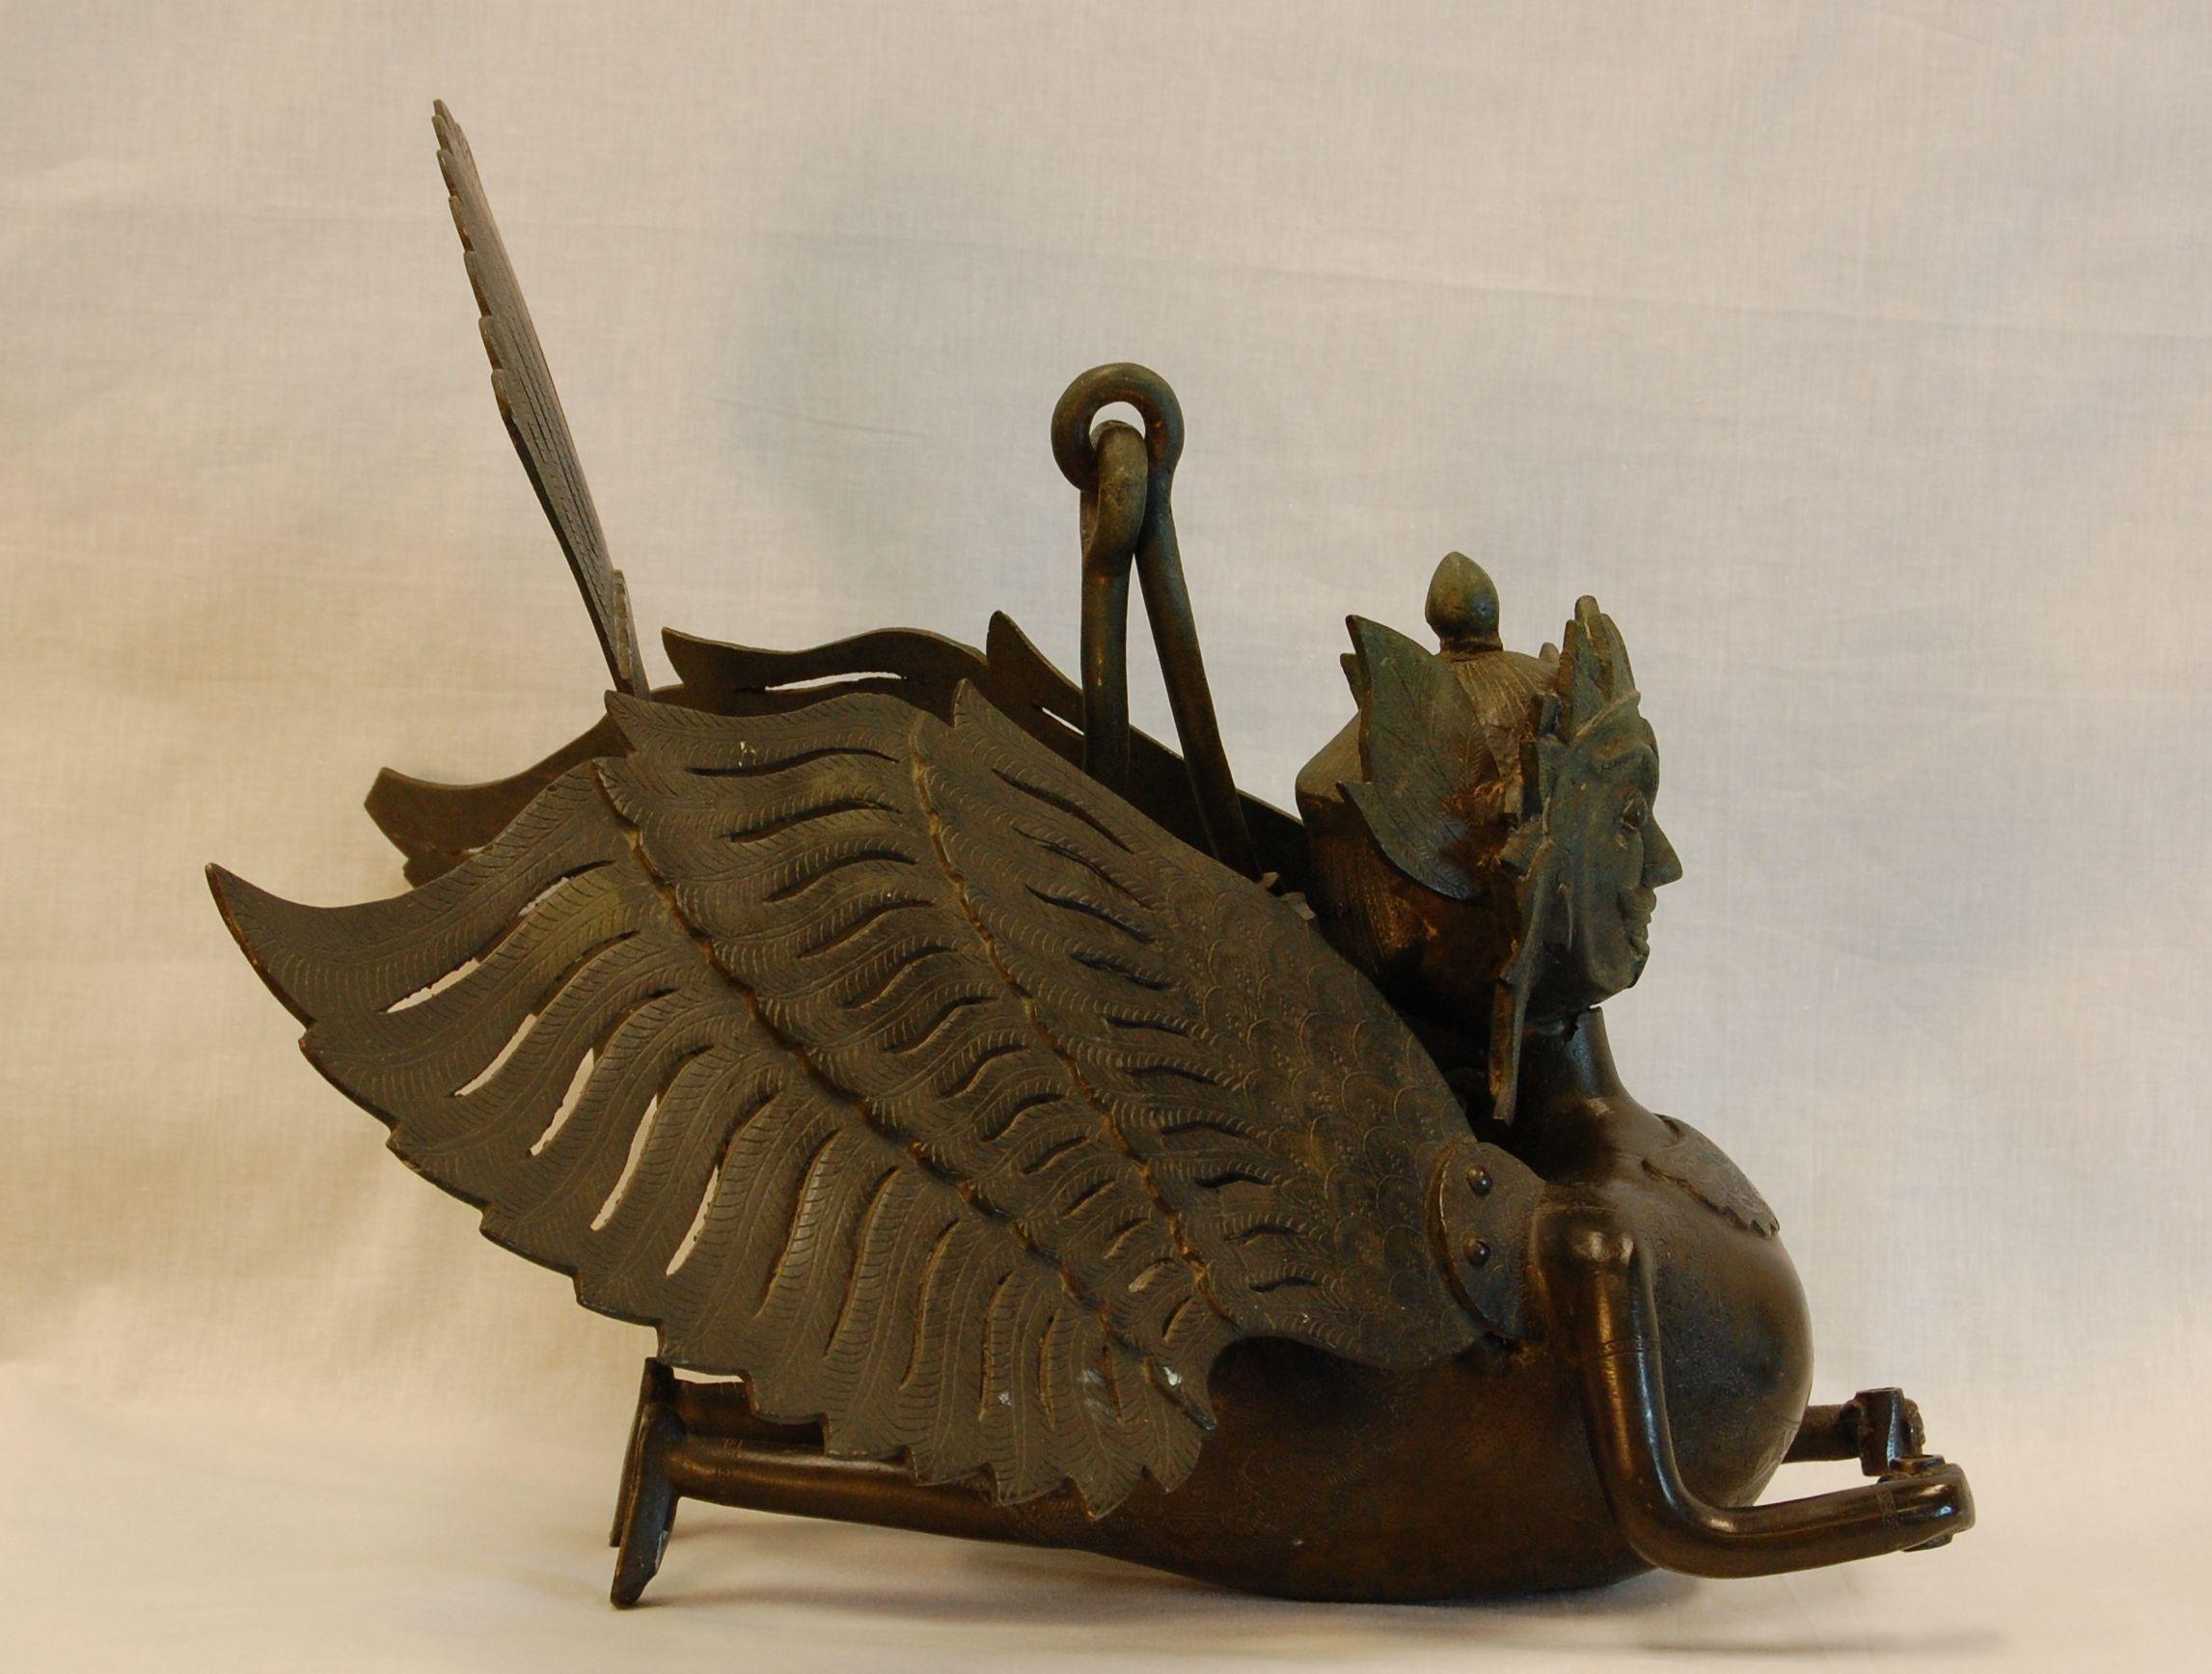 Large, heavy, hanging bronze incense burner in form of ancient Garuda figure. A very ornate and finely etched figure. Origin and exact age unknown. Purchased in 1962 from Madame Ray Paioss of Old Versaille antiques in New York City. This figure is